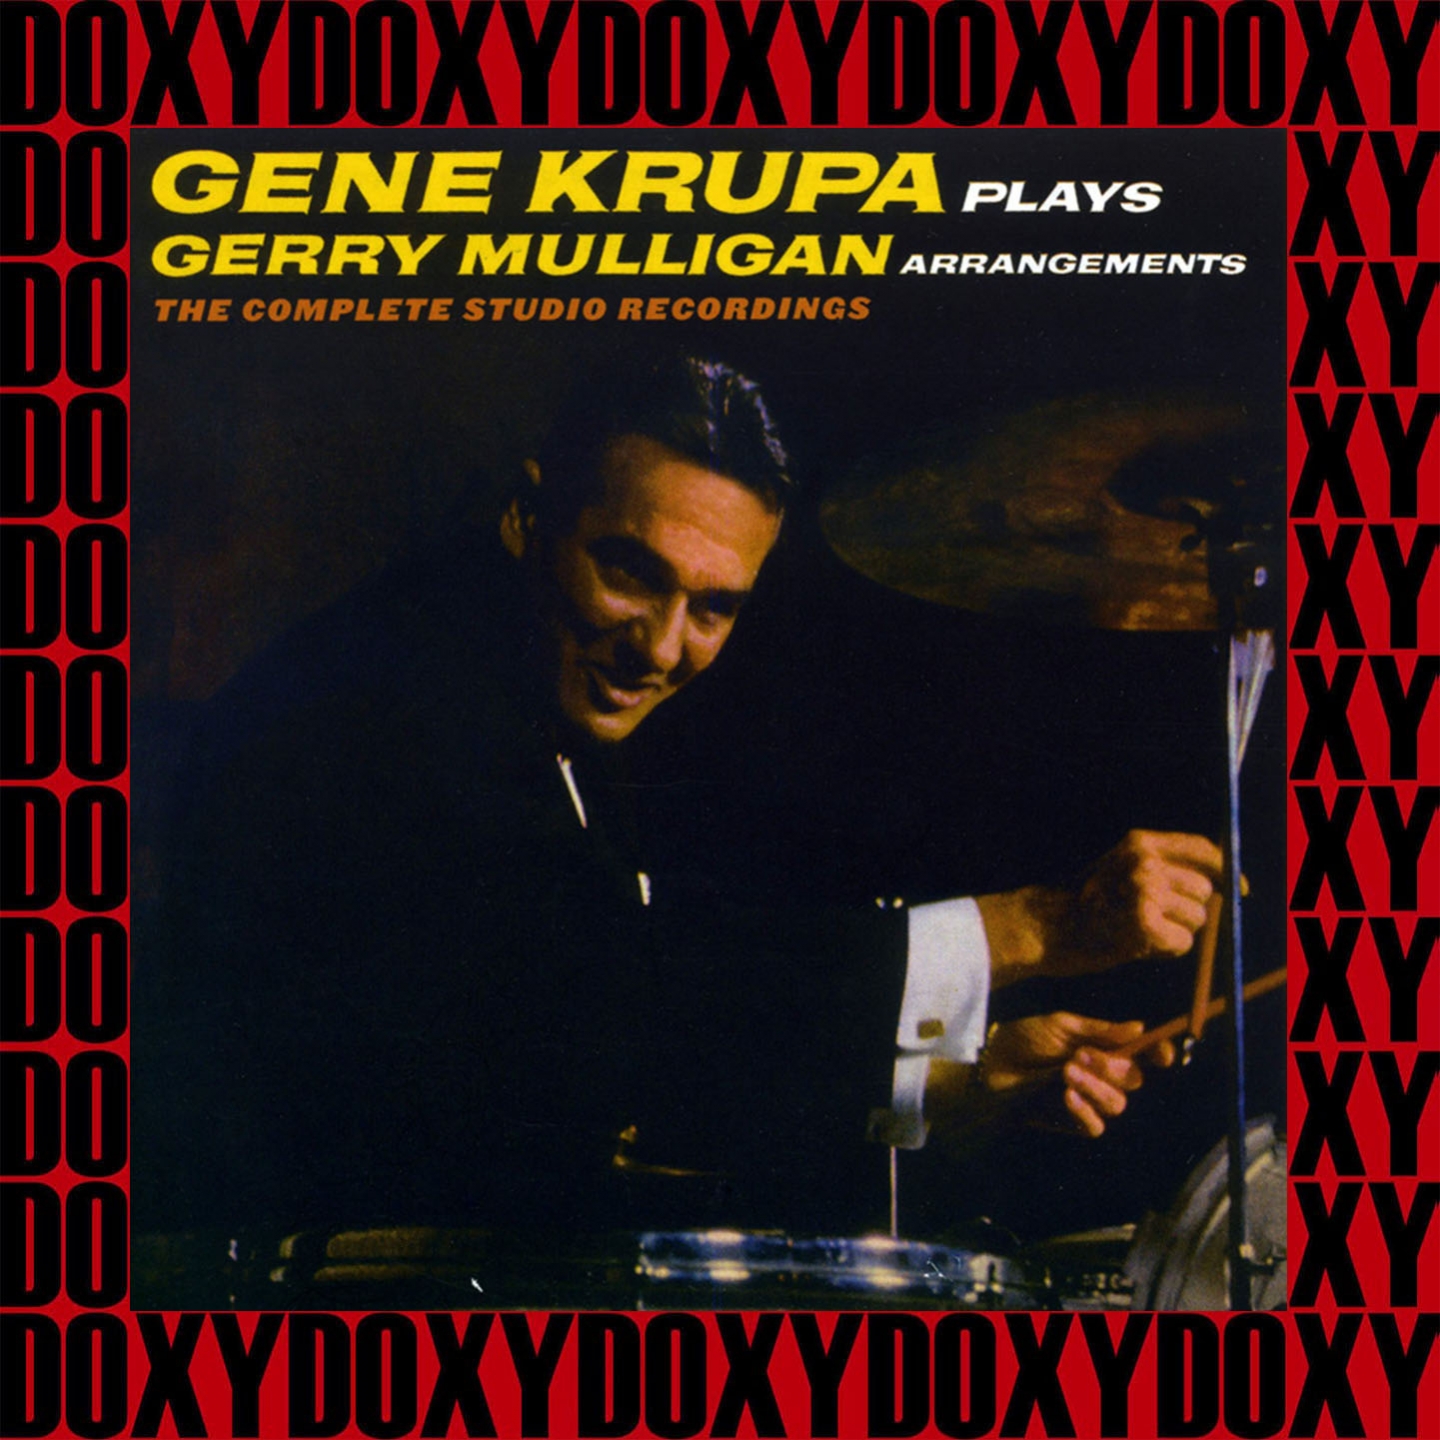 Gene Krupa plays Gerry Mulligan Arrangements, The Complete Studio Recordings (Expanded,Remastered Version) (Doxy Collection)